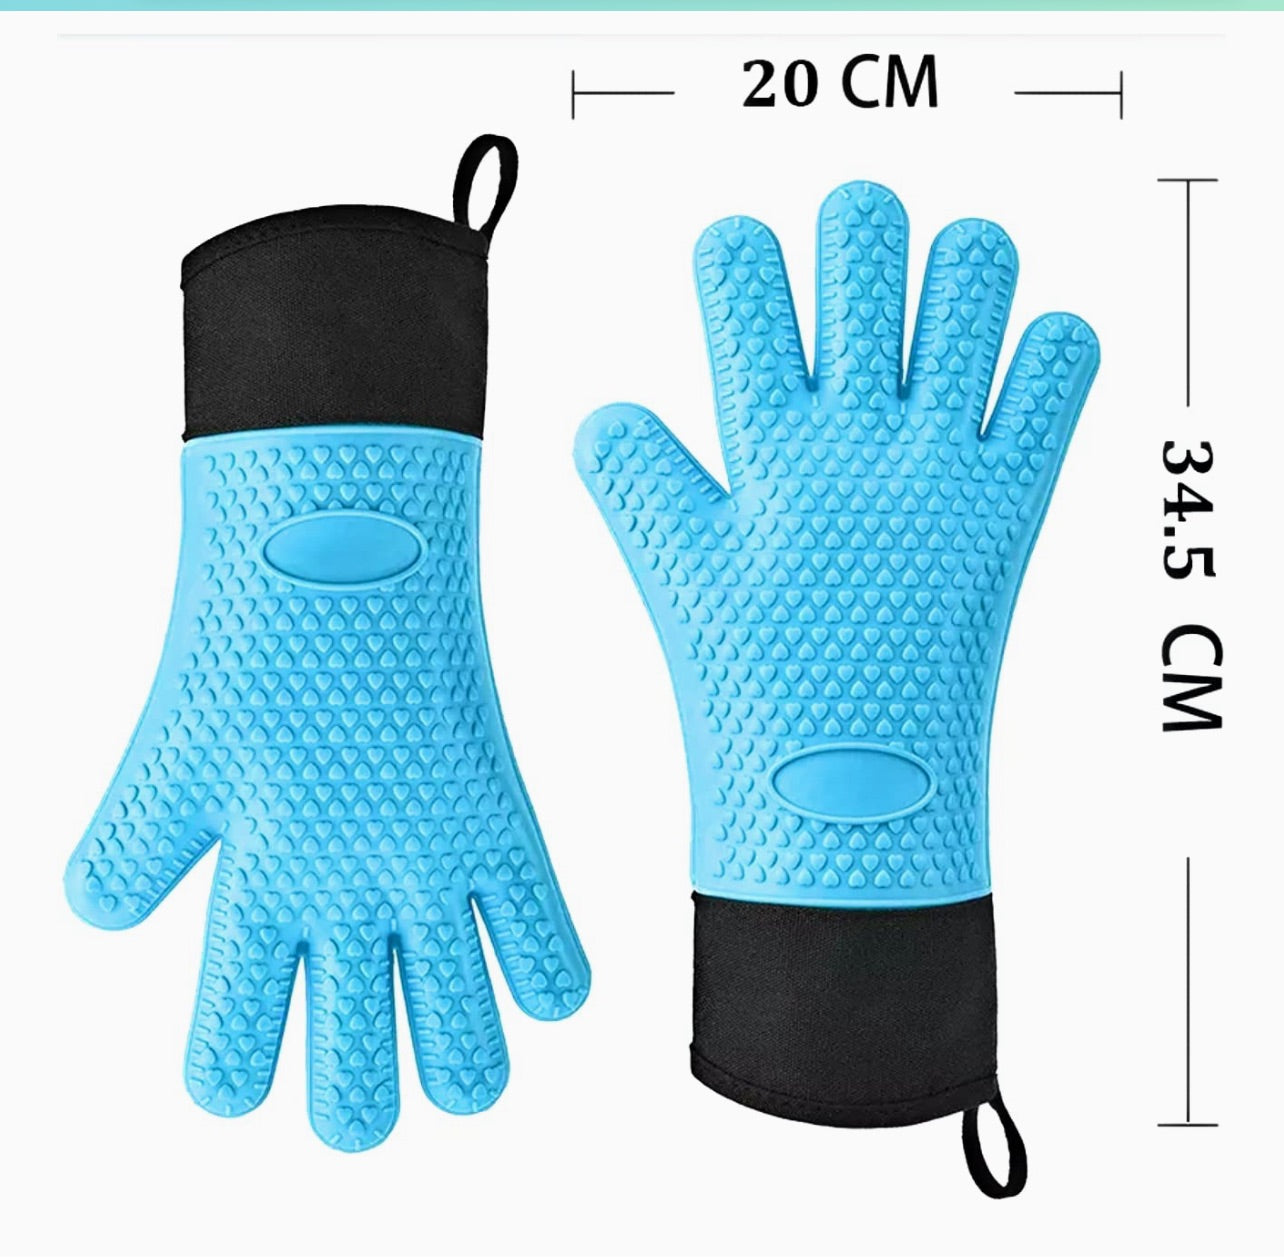 Non- Slip Heat Resistant Pot Holders Silicone Microwave Gloves Oven Baking Hot Pot BBQ Gloves Silicone Oven Mitt.    Non- Slip Heat Resistant Pot Holders Silicone Microwave Gloves Oven Baking Hot Pot BBQ Gloves Silicone Oven Mitt.